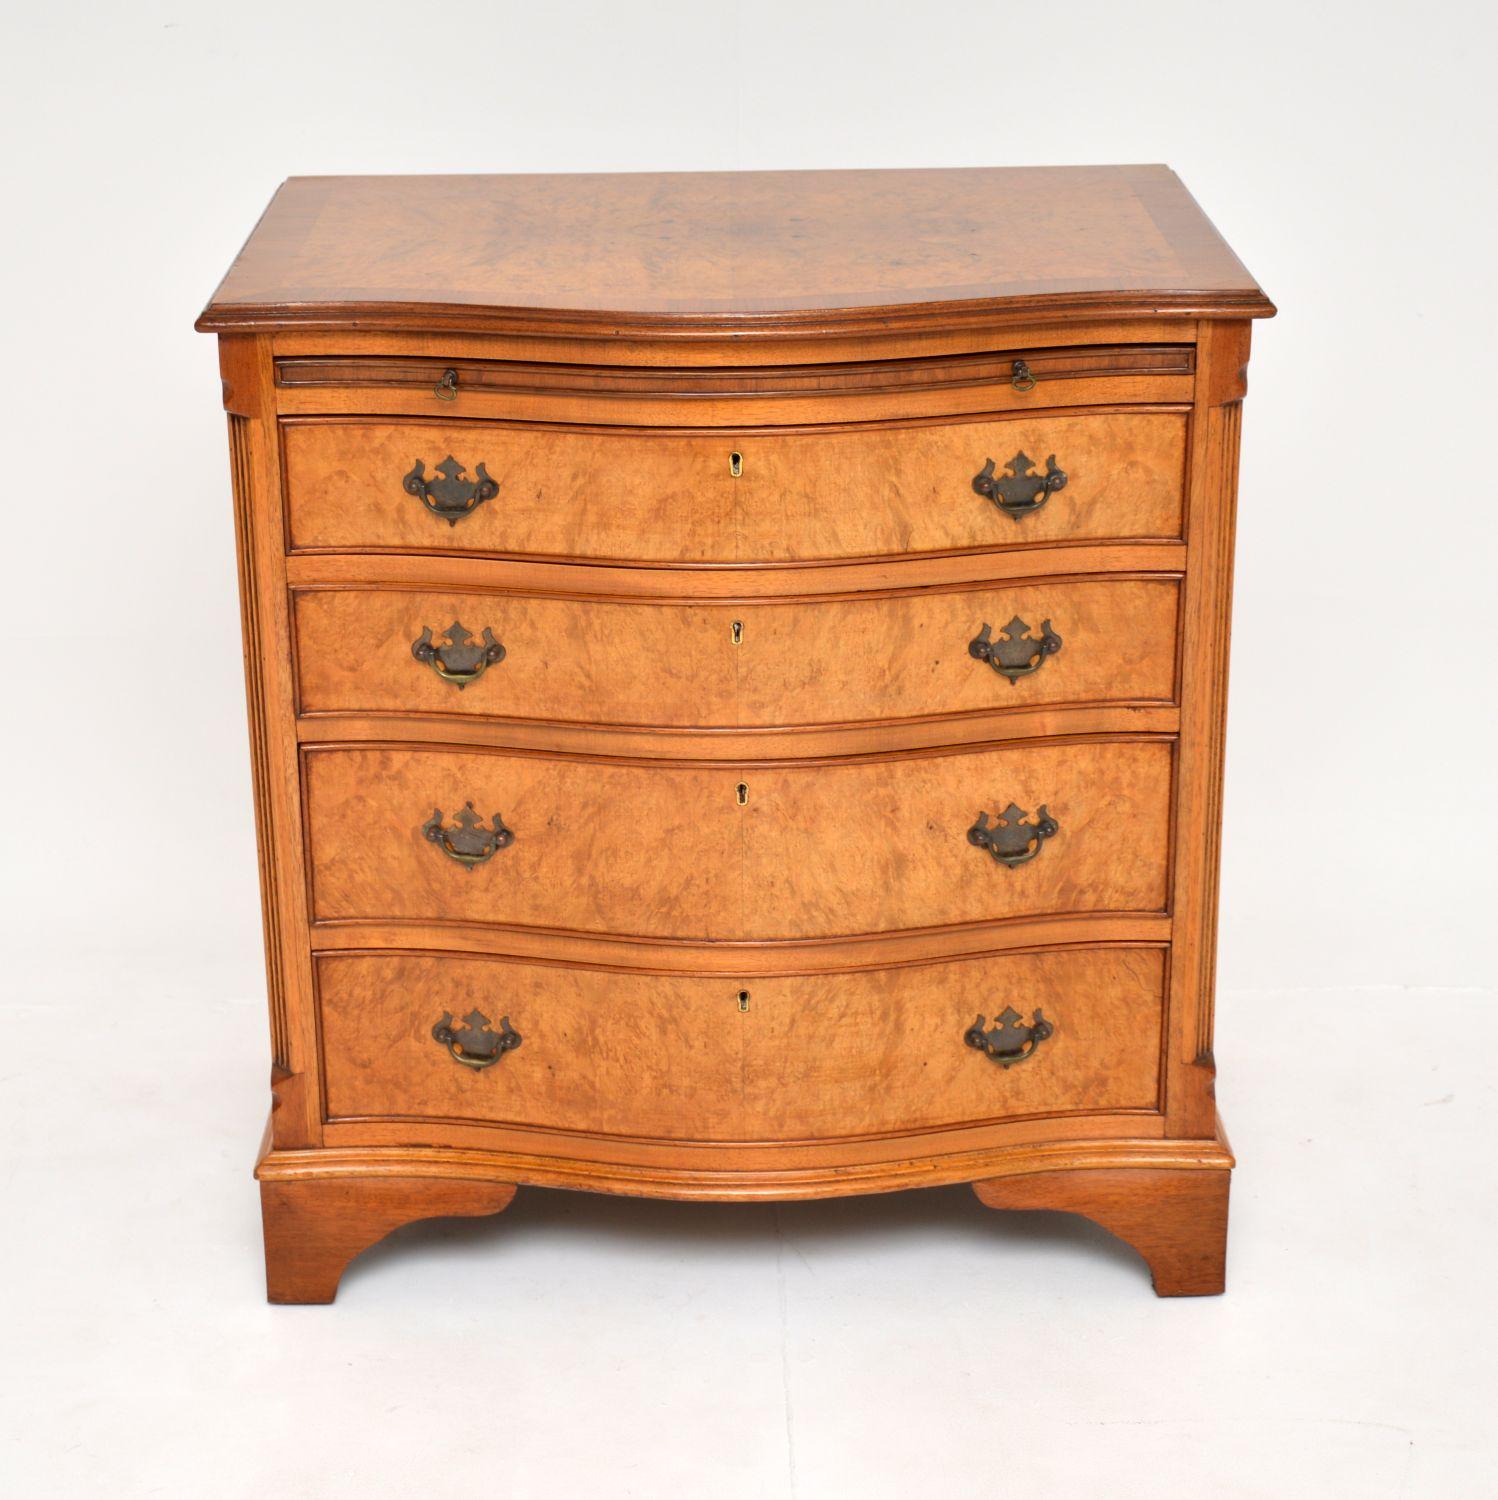 A beautifully made and very useful antique burr walnut chest of drawers, made in England & dating from around the 1930’s.

It’s of fantastic quality and has nice proportions. There is lots of storage space in the four generous drawers, which are